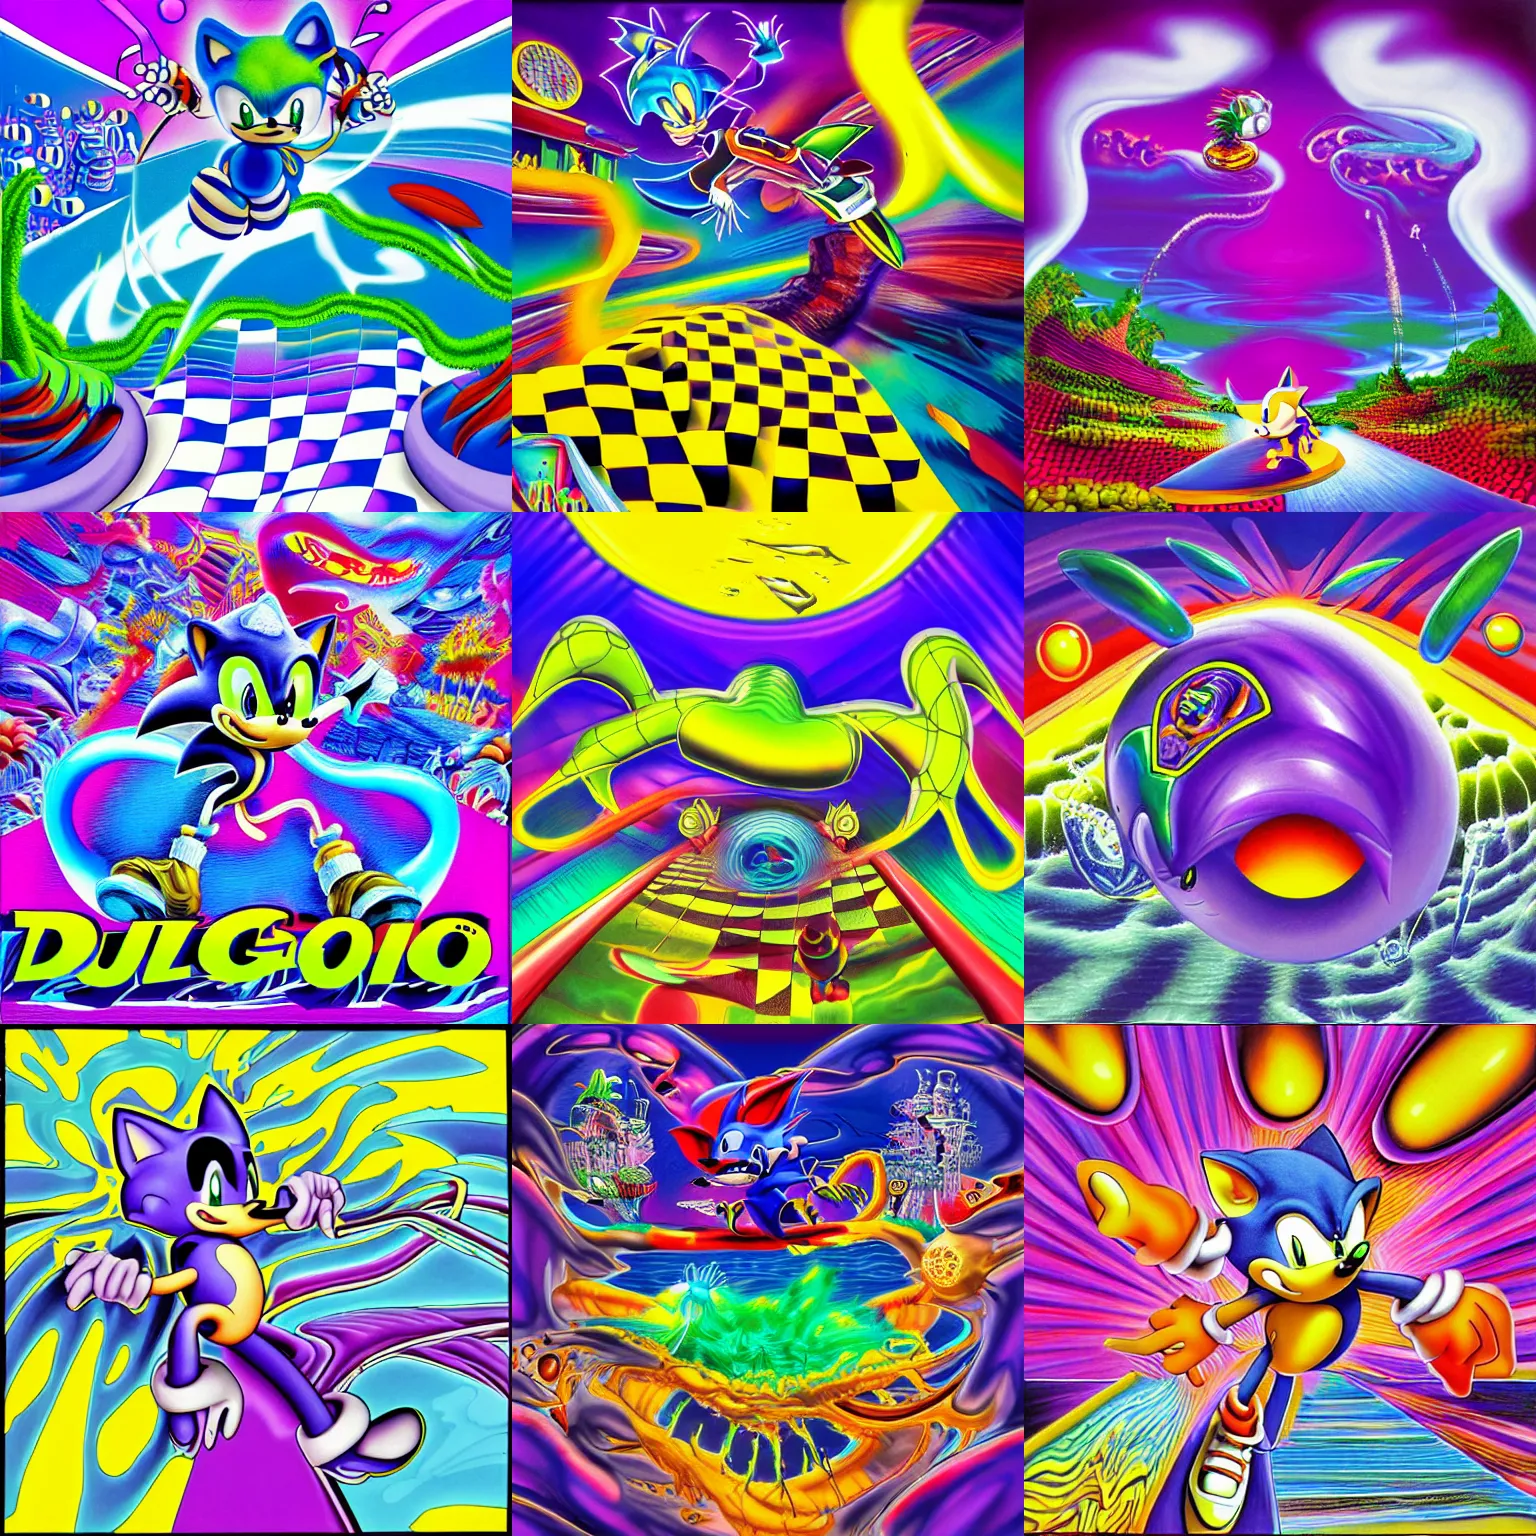 Prompt: surreal, sharp, detailed professional, high quality airbrush art mgmt album cover of a liquid dissolving airbrush art lsd dmt sonic the hedgehog surfing through cyberspace, purple checkerboard background, 1 9 9 0 s 1 9 9 2 sega genesis video game album cover